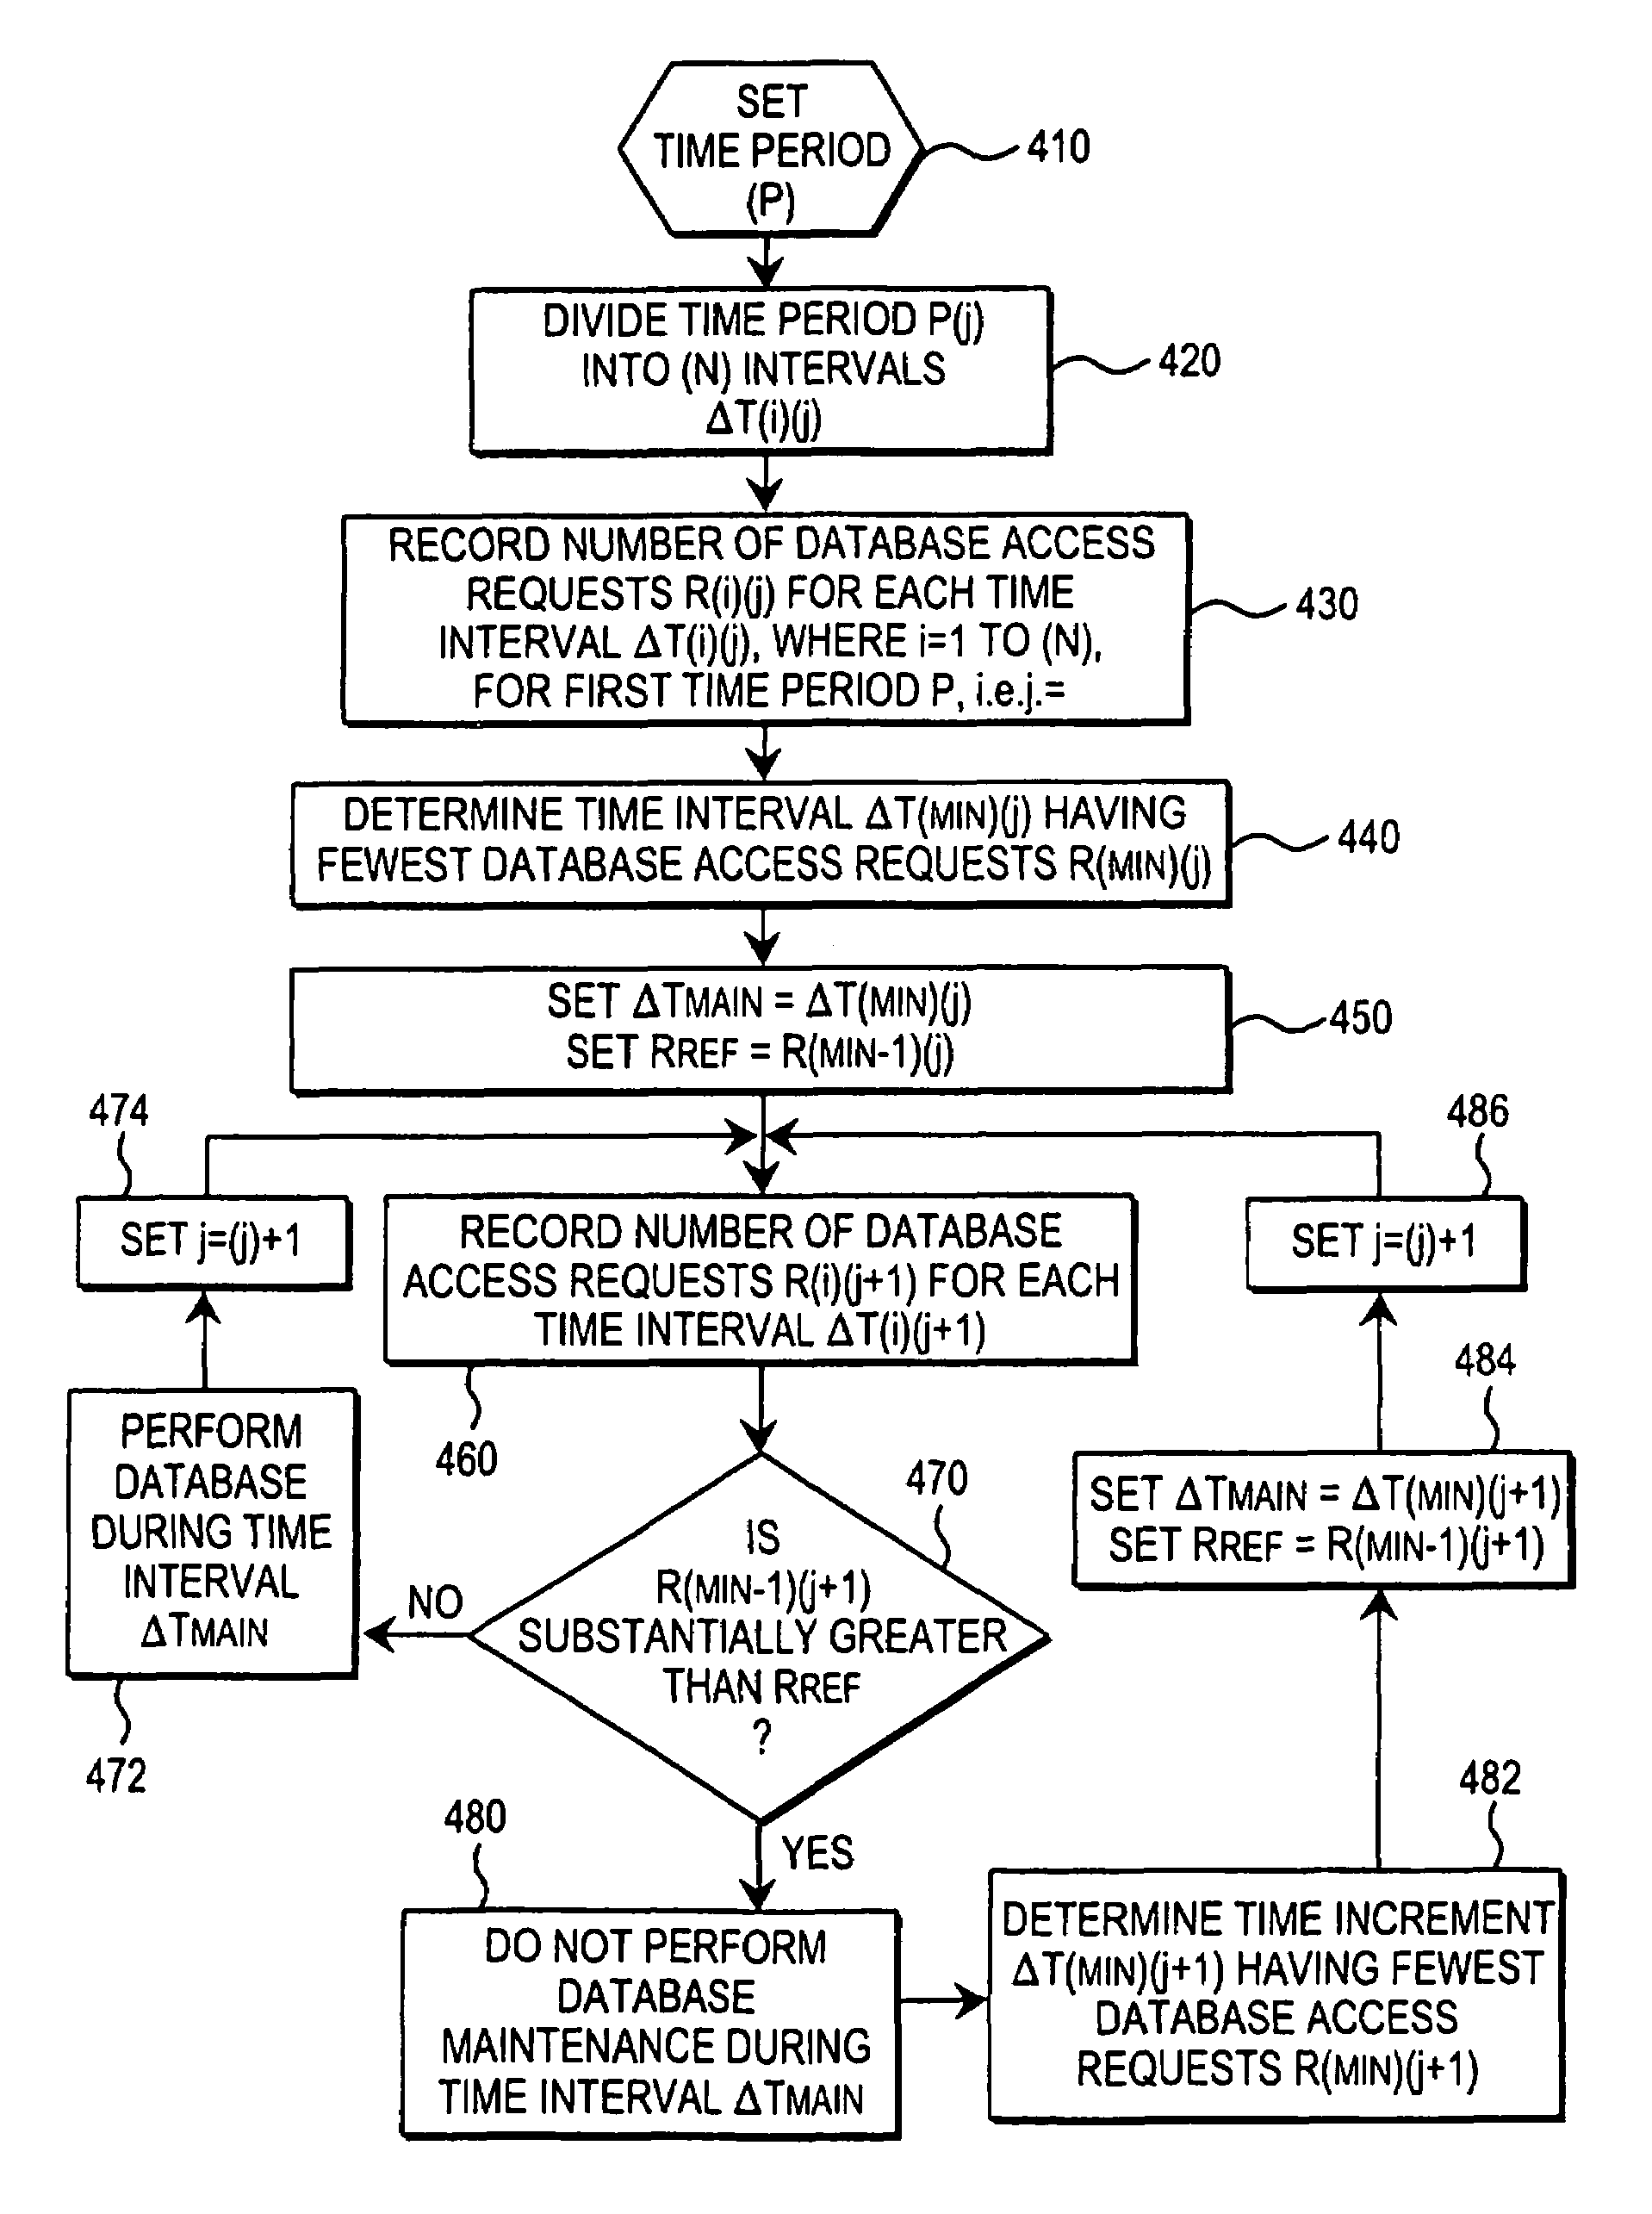 Apparatus and method to schedule and perform database maintenance